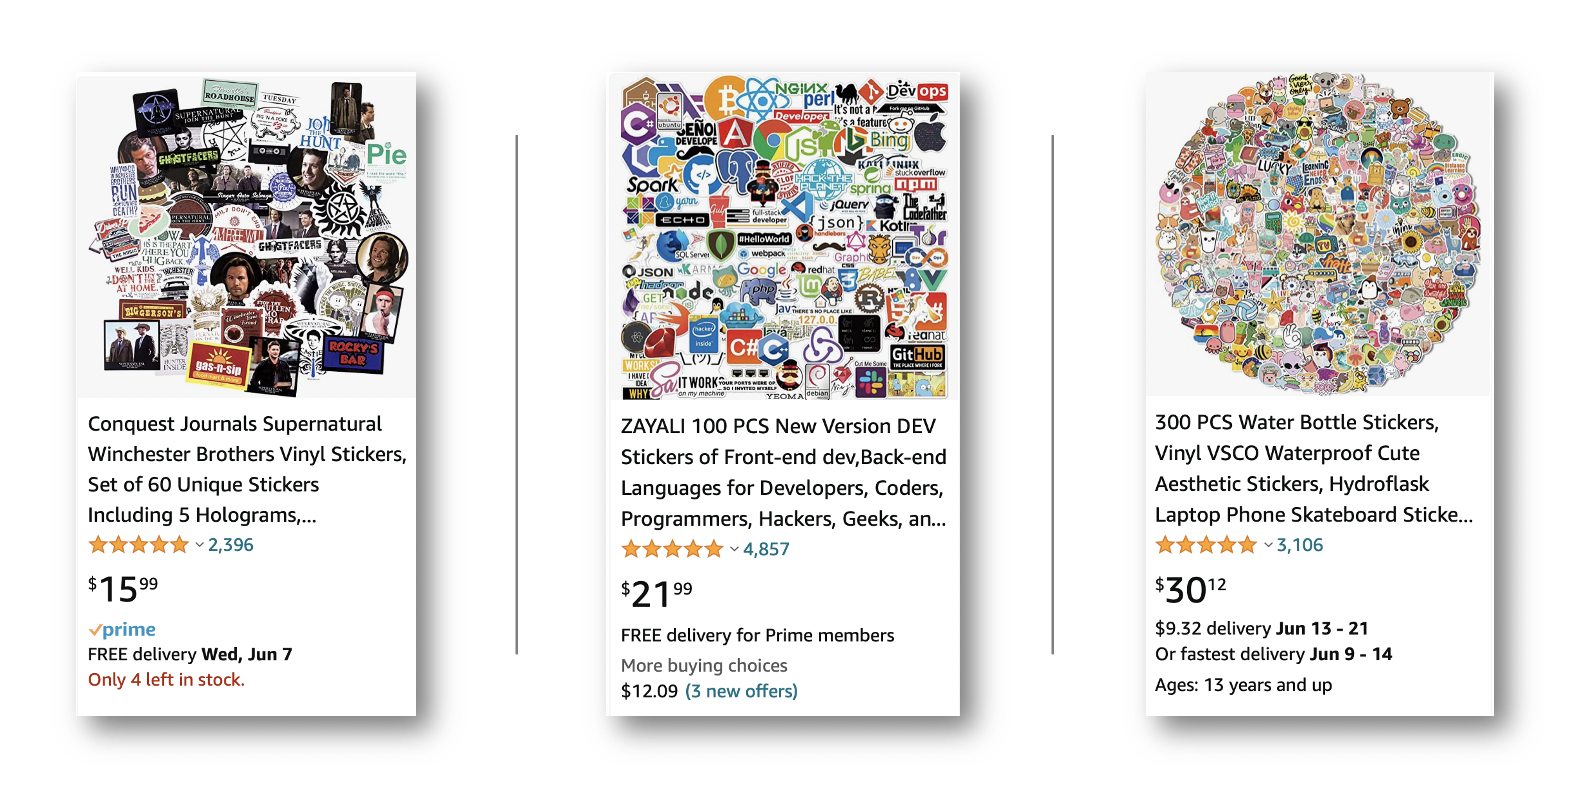 Hot Selling Stickers on Amazon